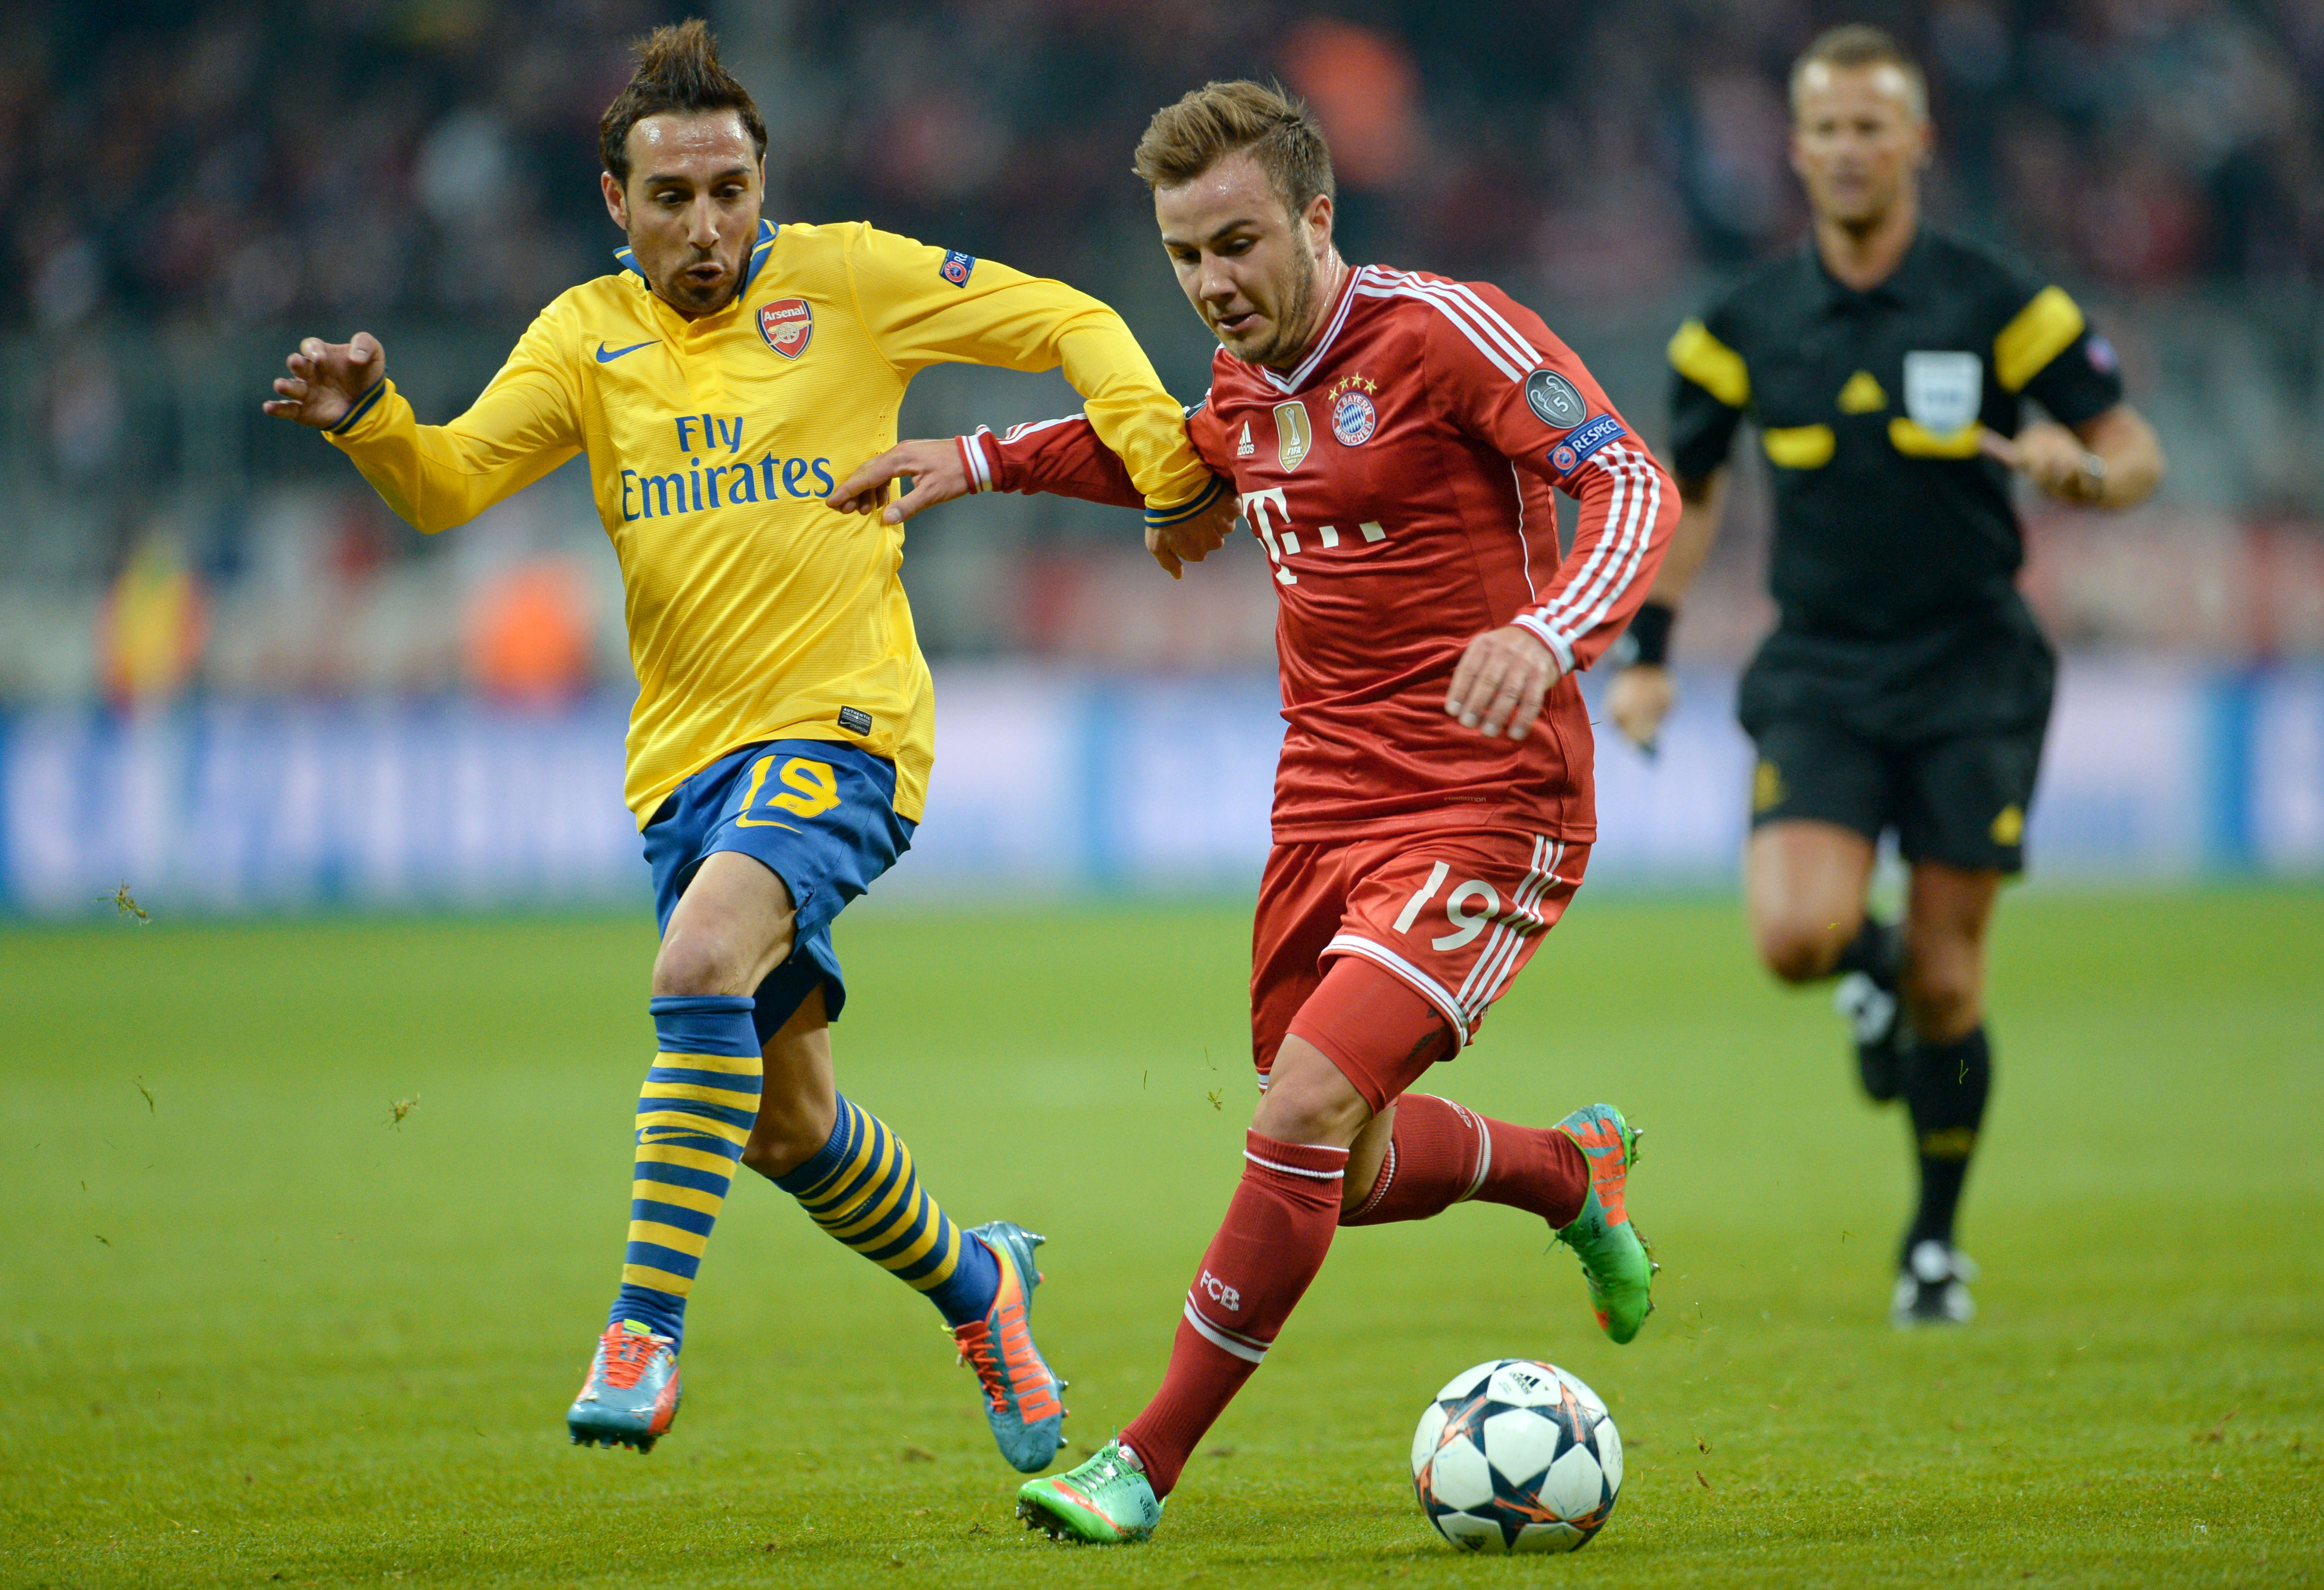 epa04120735 Munich's Mario Gotze (R) and Santi Cazorla of Arsenal in action during the UEFA Champions League round of 16 second leg soccer match between Bayern Munich and Arsenal FC in Munich, Germany, 11 March 2014.  EPA/ANDRERAS GEBERT